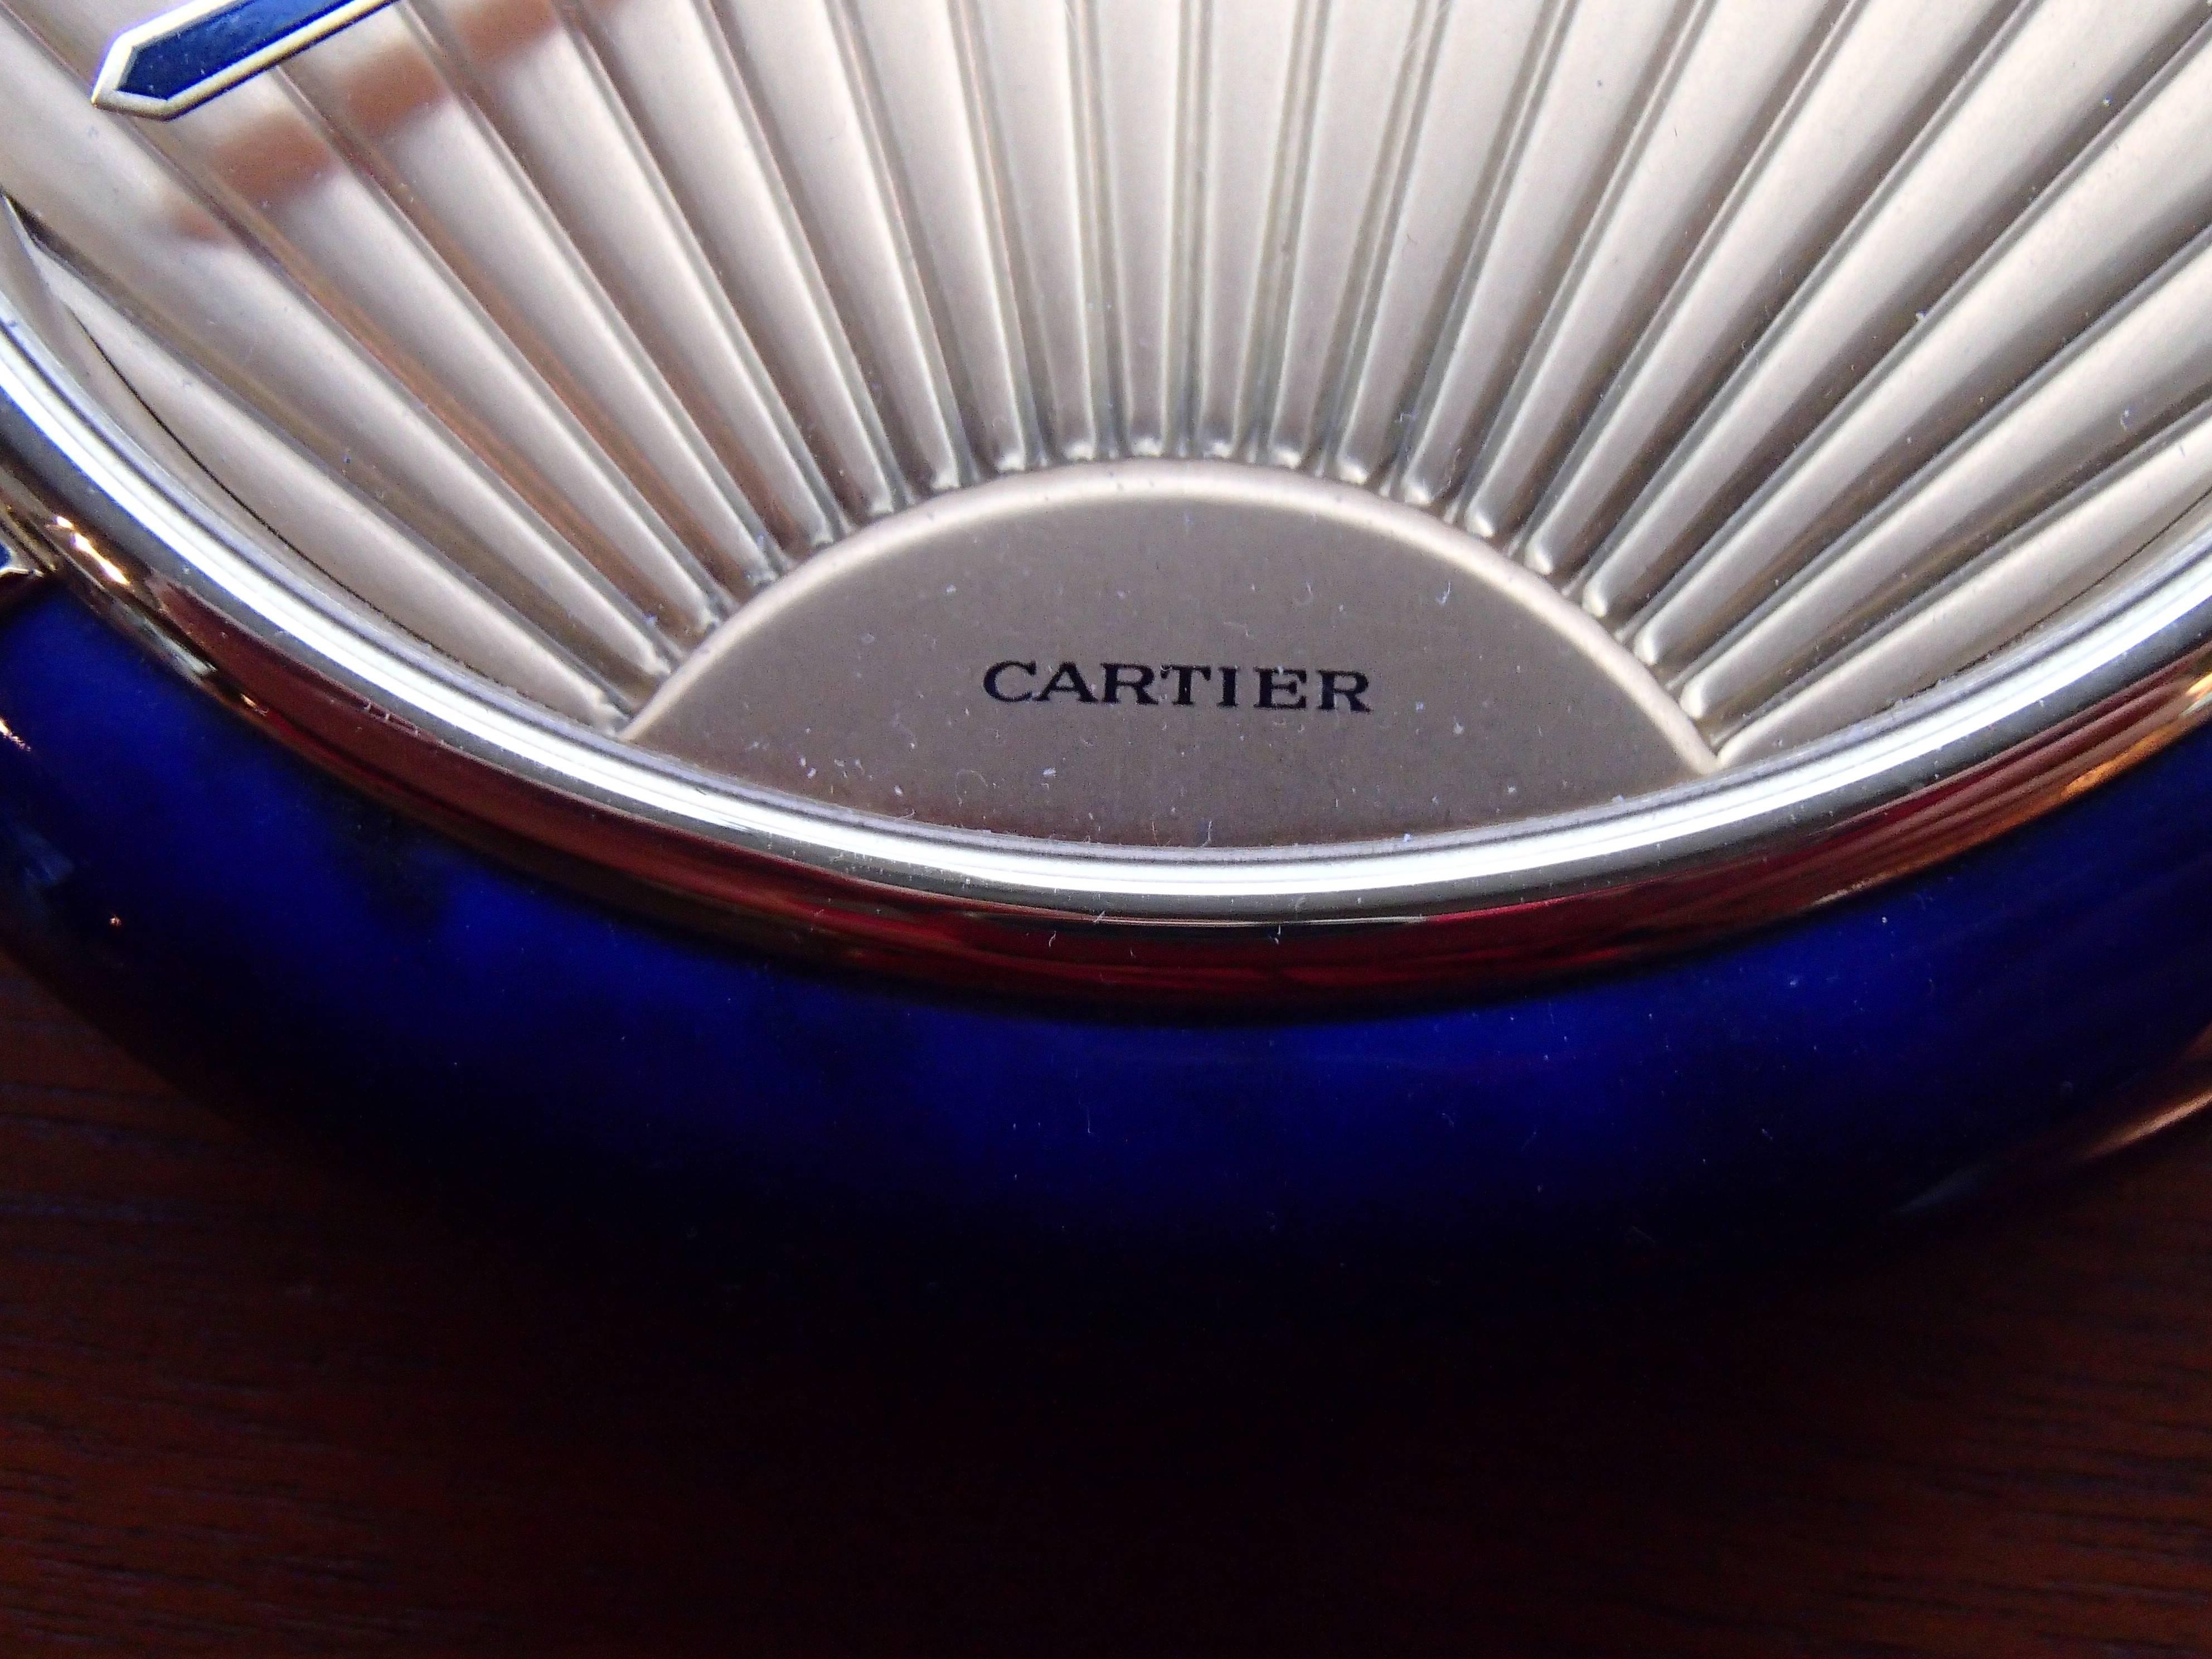 1980 this Cartier blue enamel Art Deco table clock. In full working condition with batteries. Some damage on the back side.